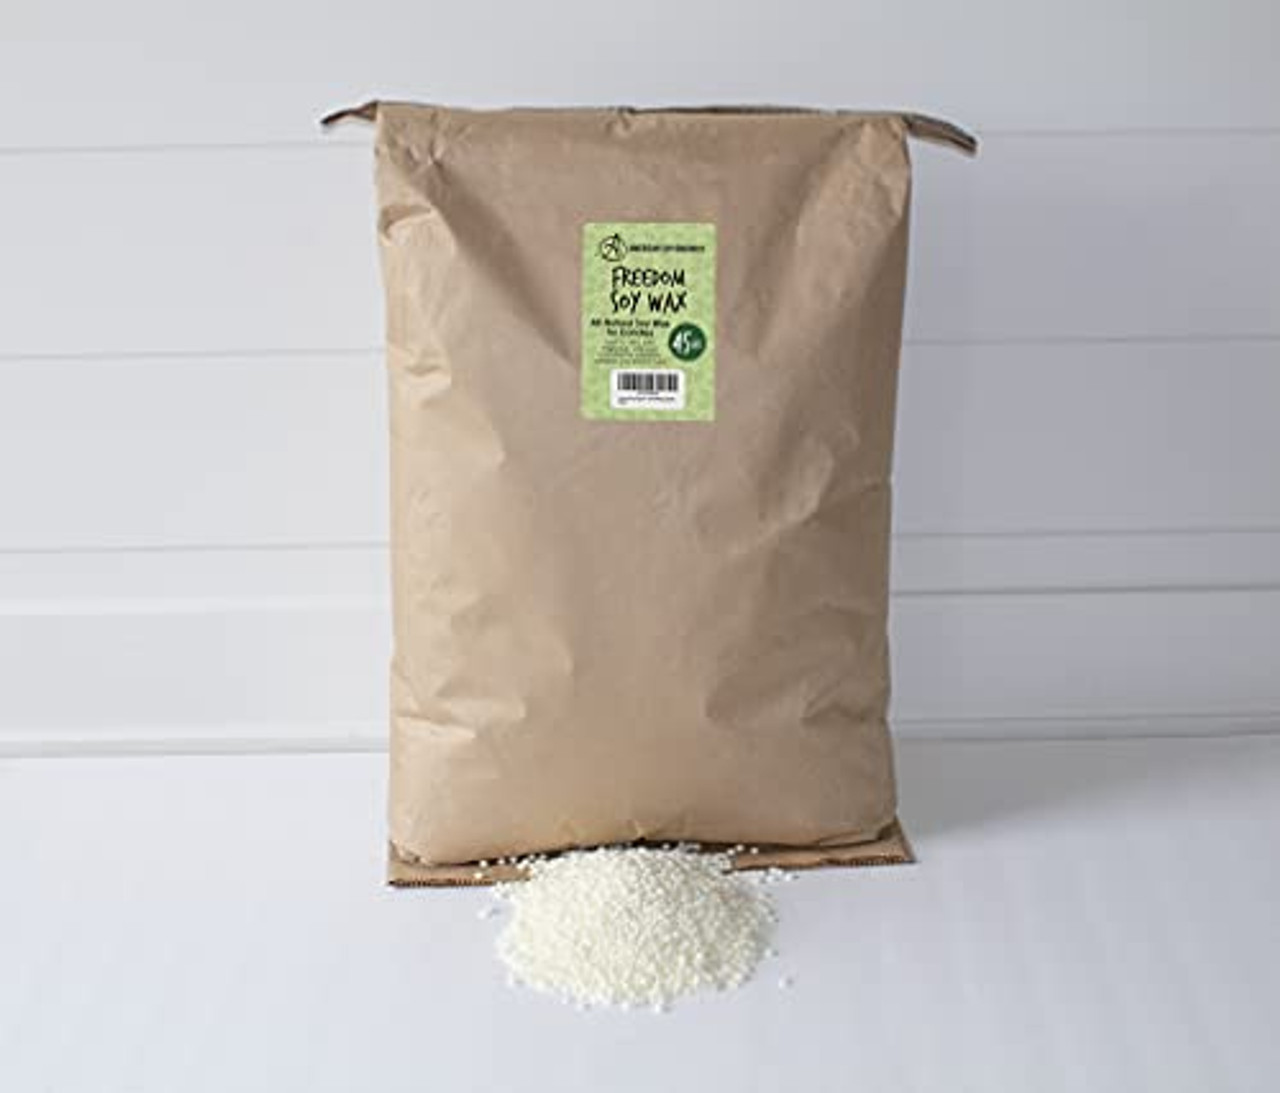 American Soy Organics- 45 lb of Freedom Soy Wax Beads for Candle